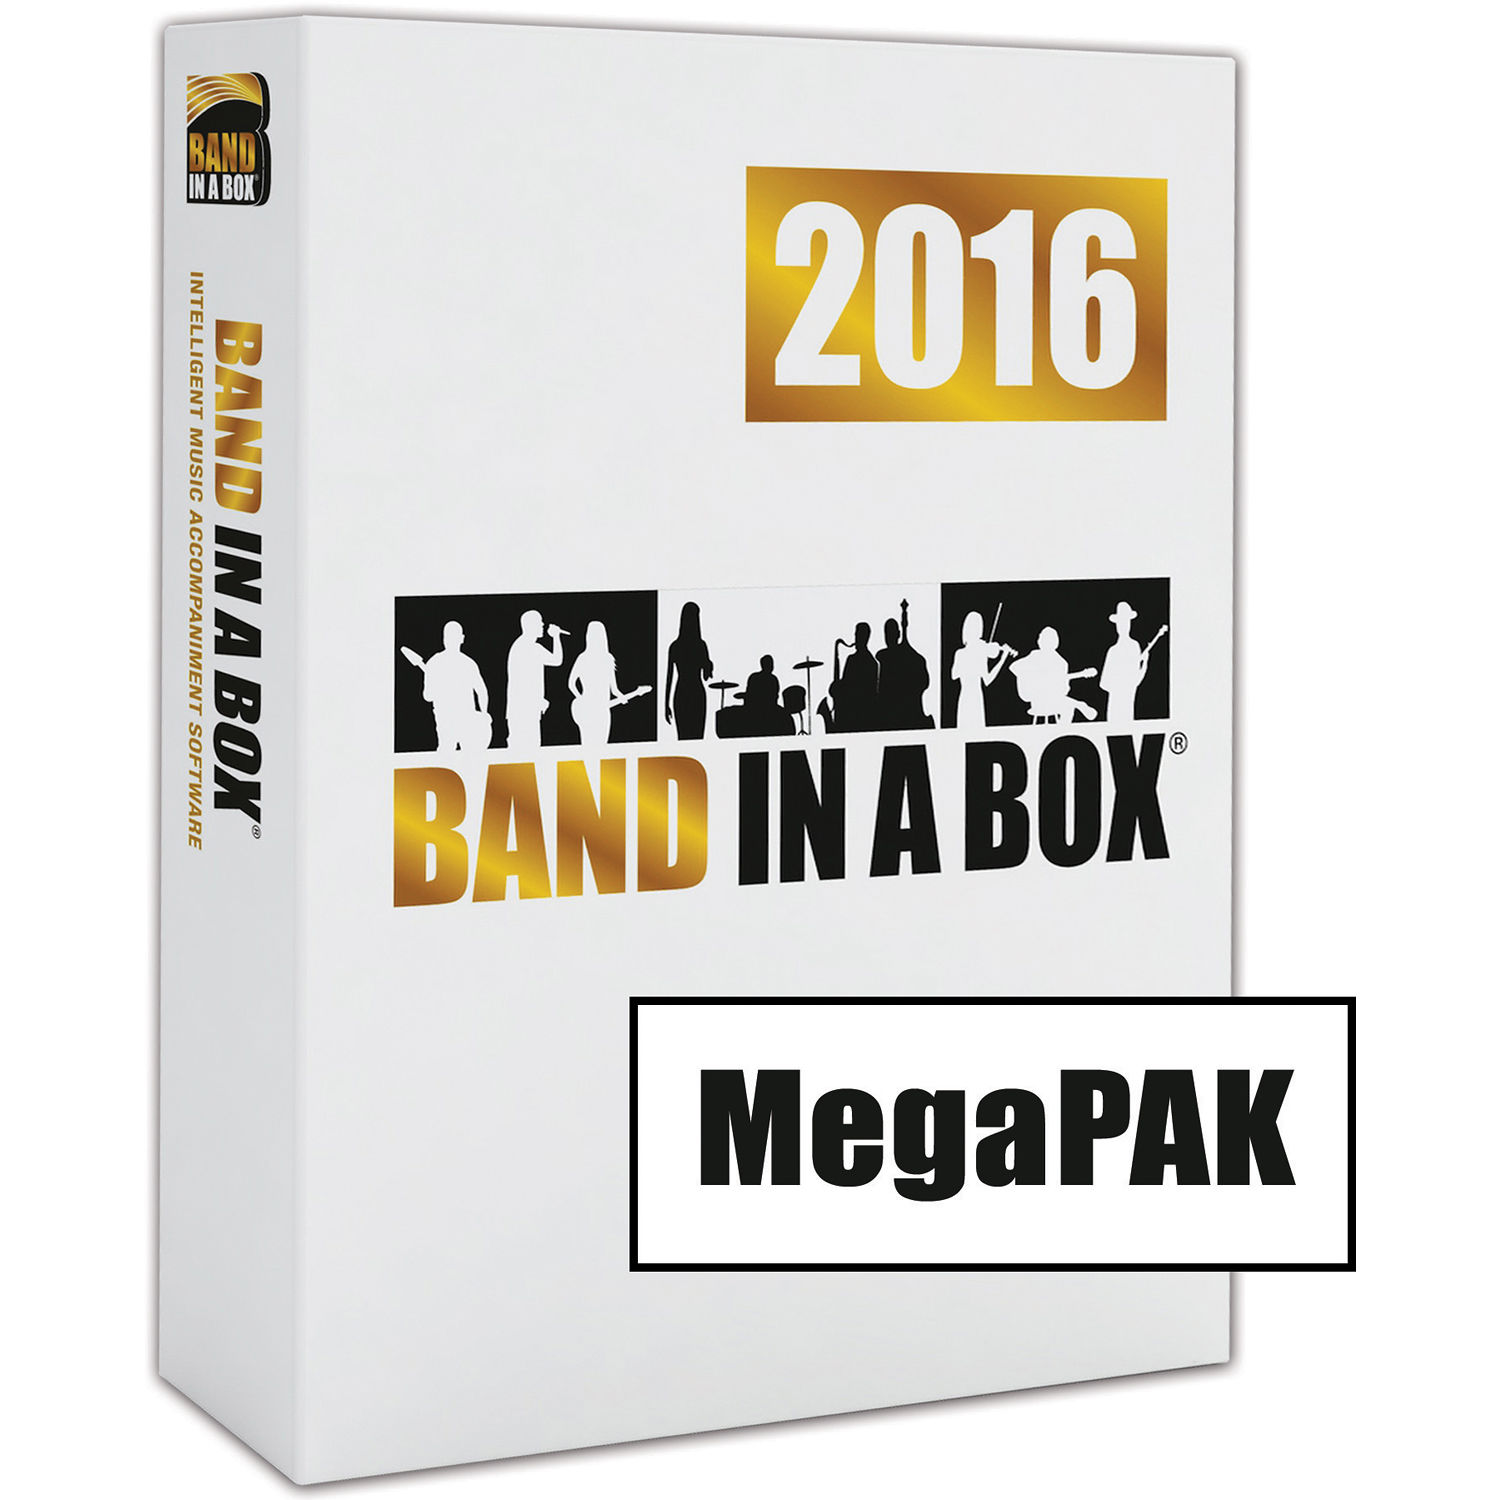 Download Band-in-a-box 2016 For Mac